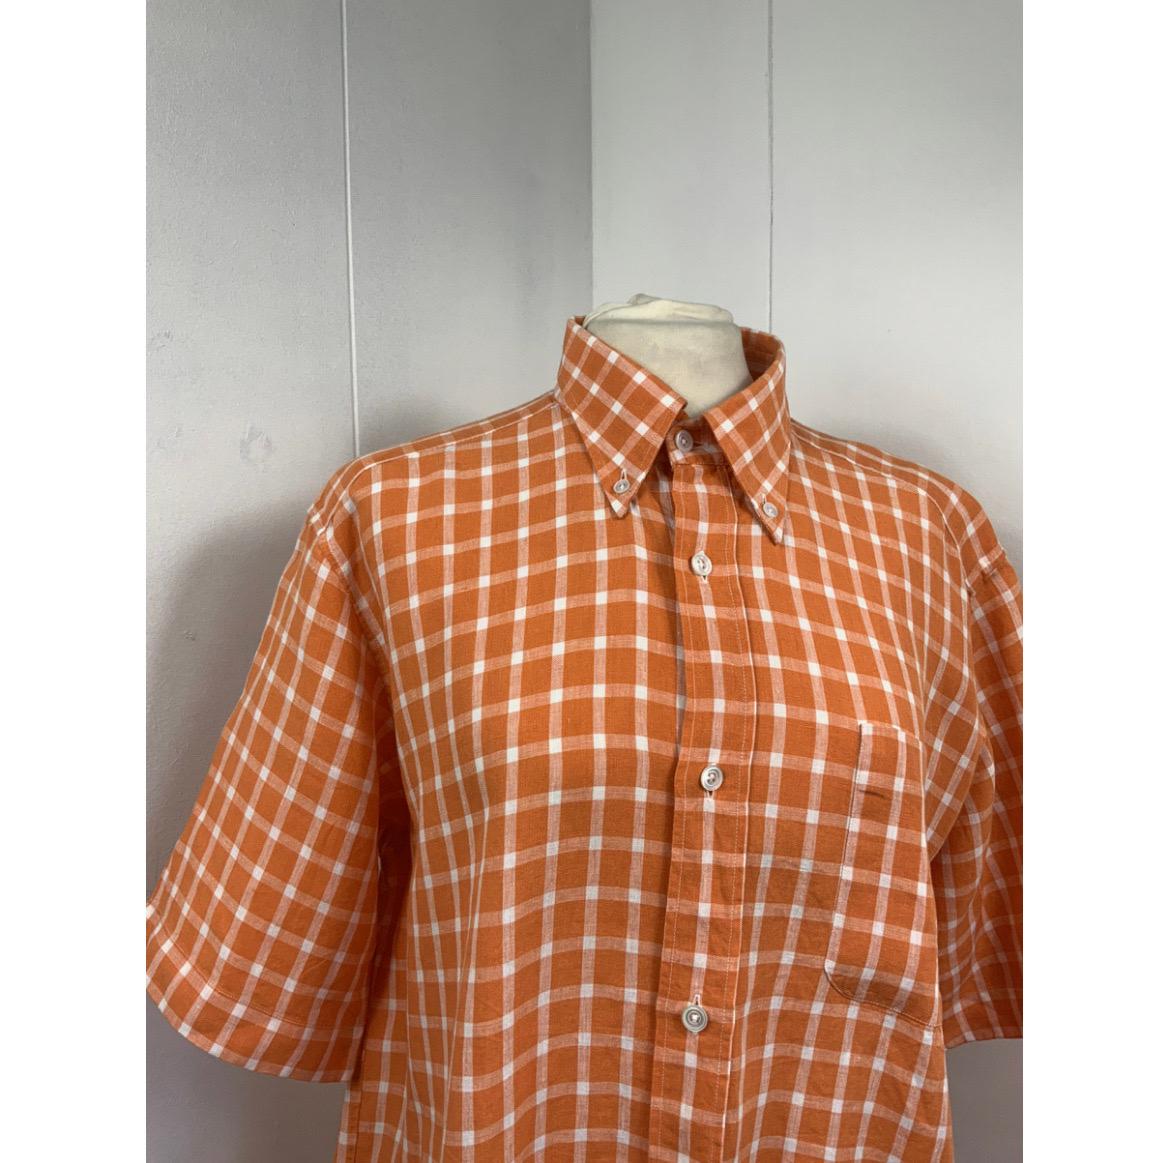 Hermes linen shirt, orange checked pattern. Size indicated 15 and 3/4 40. Corresponds to an international M. shoulders 46cm, bust 59cm, long 73cm, sleeve 27cm. Excellent general condition, with only some small signs of normal use.